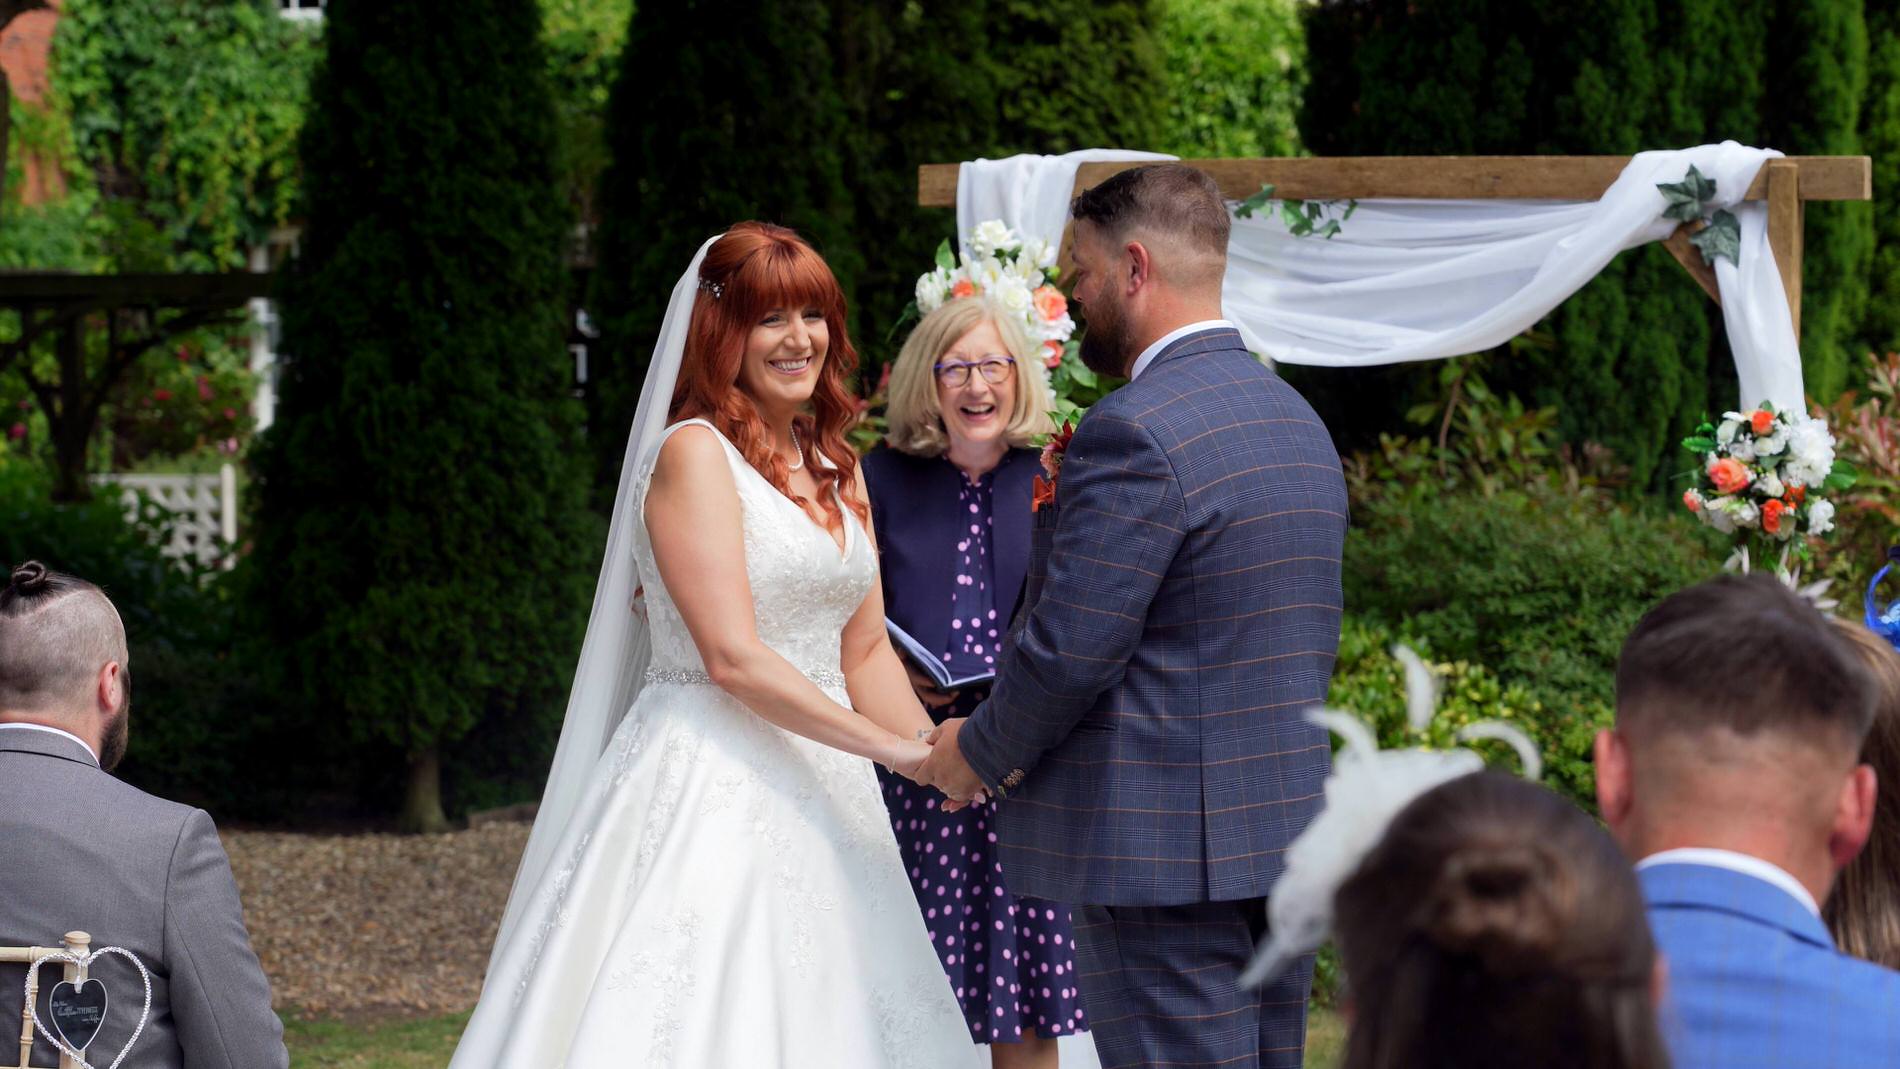 video still of couple laughing during outdoor ceremony at Nunsmere hall